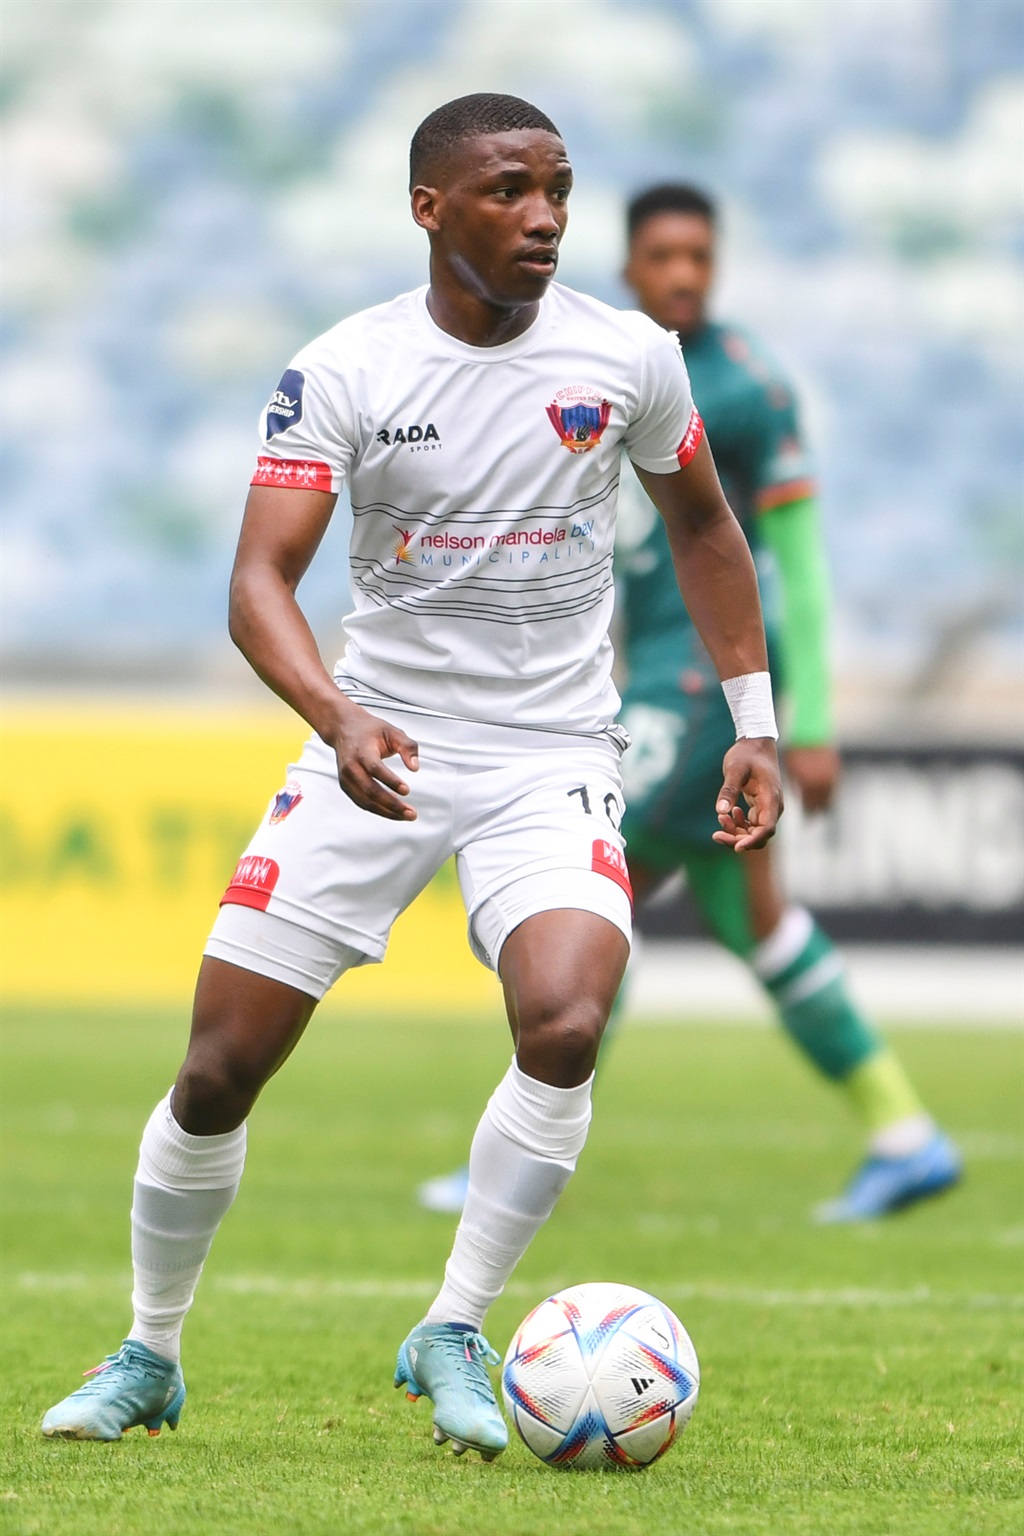 DURBAN, SOUTH AFRICA - SEPTEMBER 10: Azola Matrose of Chippa United during the DStv Premiership match between AmaZulu FC and Chippa United at Moses Mabhida Stadium on September 10, 2022 in Durban, South Africa. (Photo by Darren Stewart/Gallo Images)